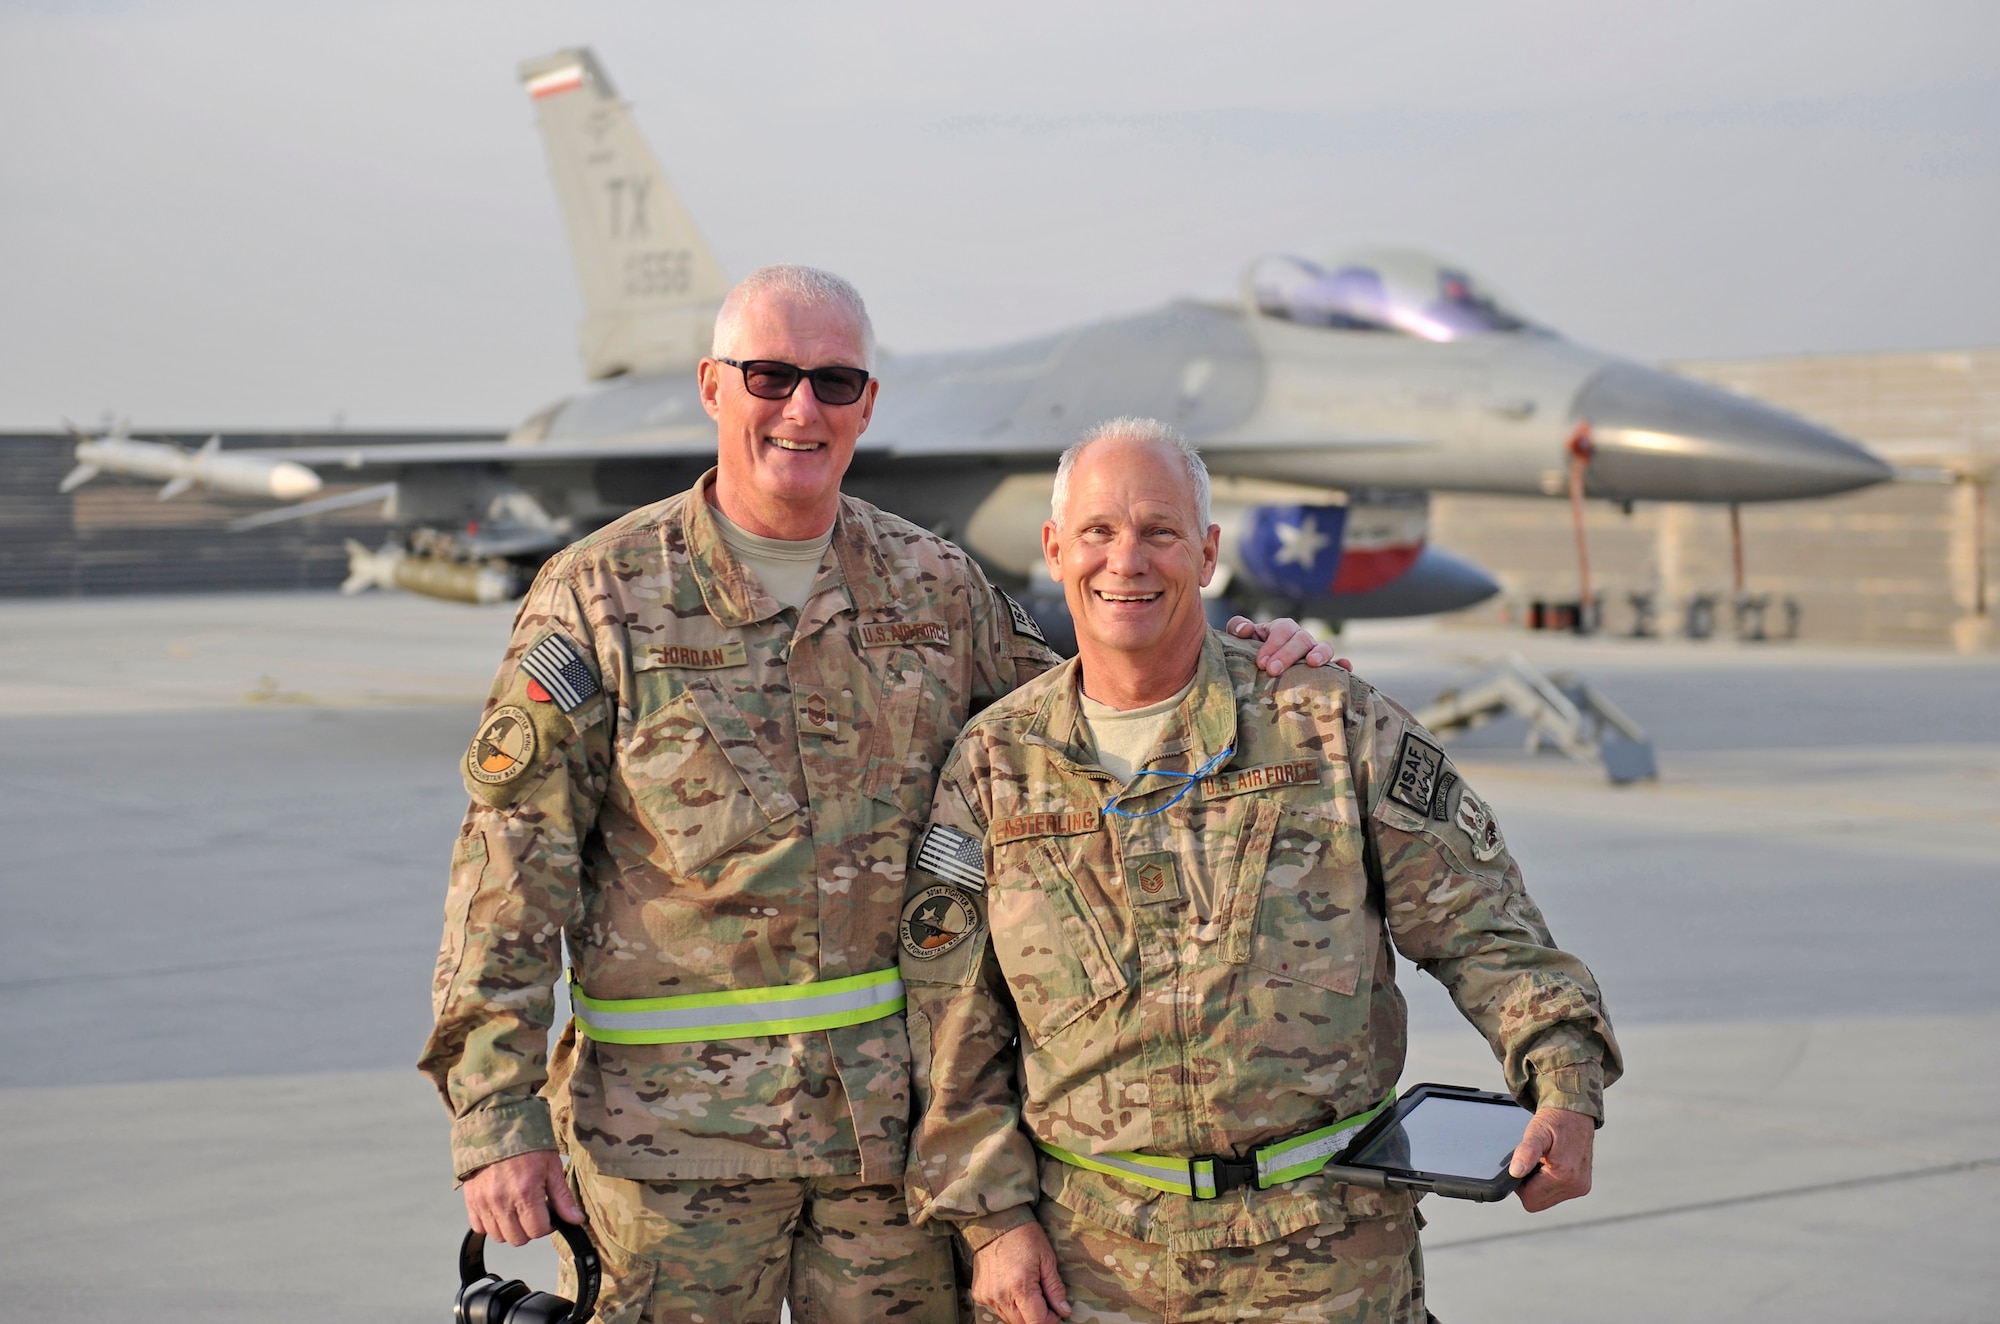 U.S. Air Force Senior Master Sgt. Paul Jordan and Master Sgt. Doyle Easterling stand together in front of their F-16 Fighting Falcon after a successful engine test run at Bagram Airfield, Afghanistan, Jan. 20, 2014. Both are deployed out of Carswell Joint Reserve Base in Fort Worth, Texas to Bagram, and will be retiring this year after a combined 78 years of military service. (U.S. Air Force photo by Senior Master Sgt. Gary J. Rihn/Released)